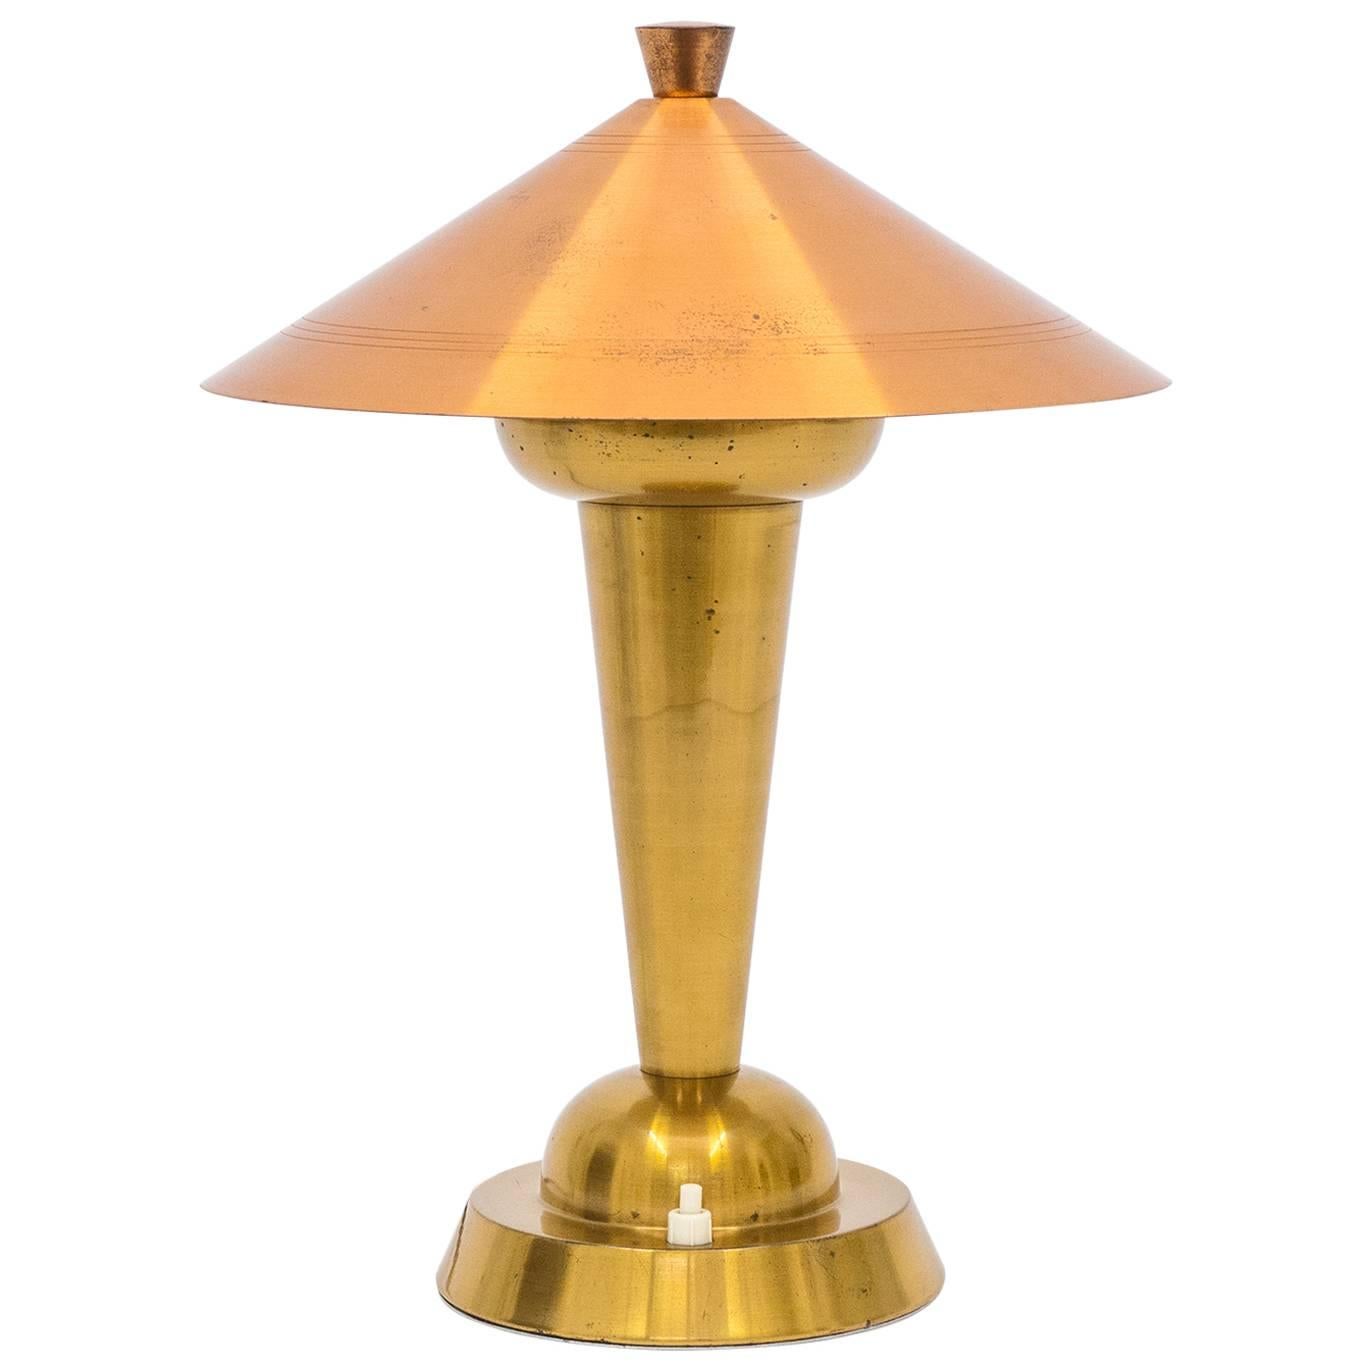 Brass and Copper Art Deco Table Lamp, 1930s